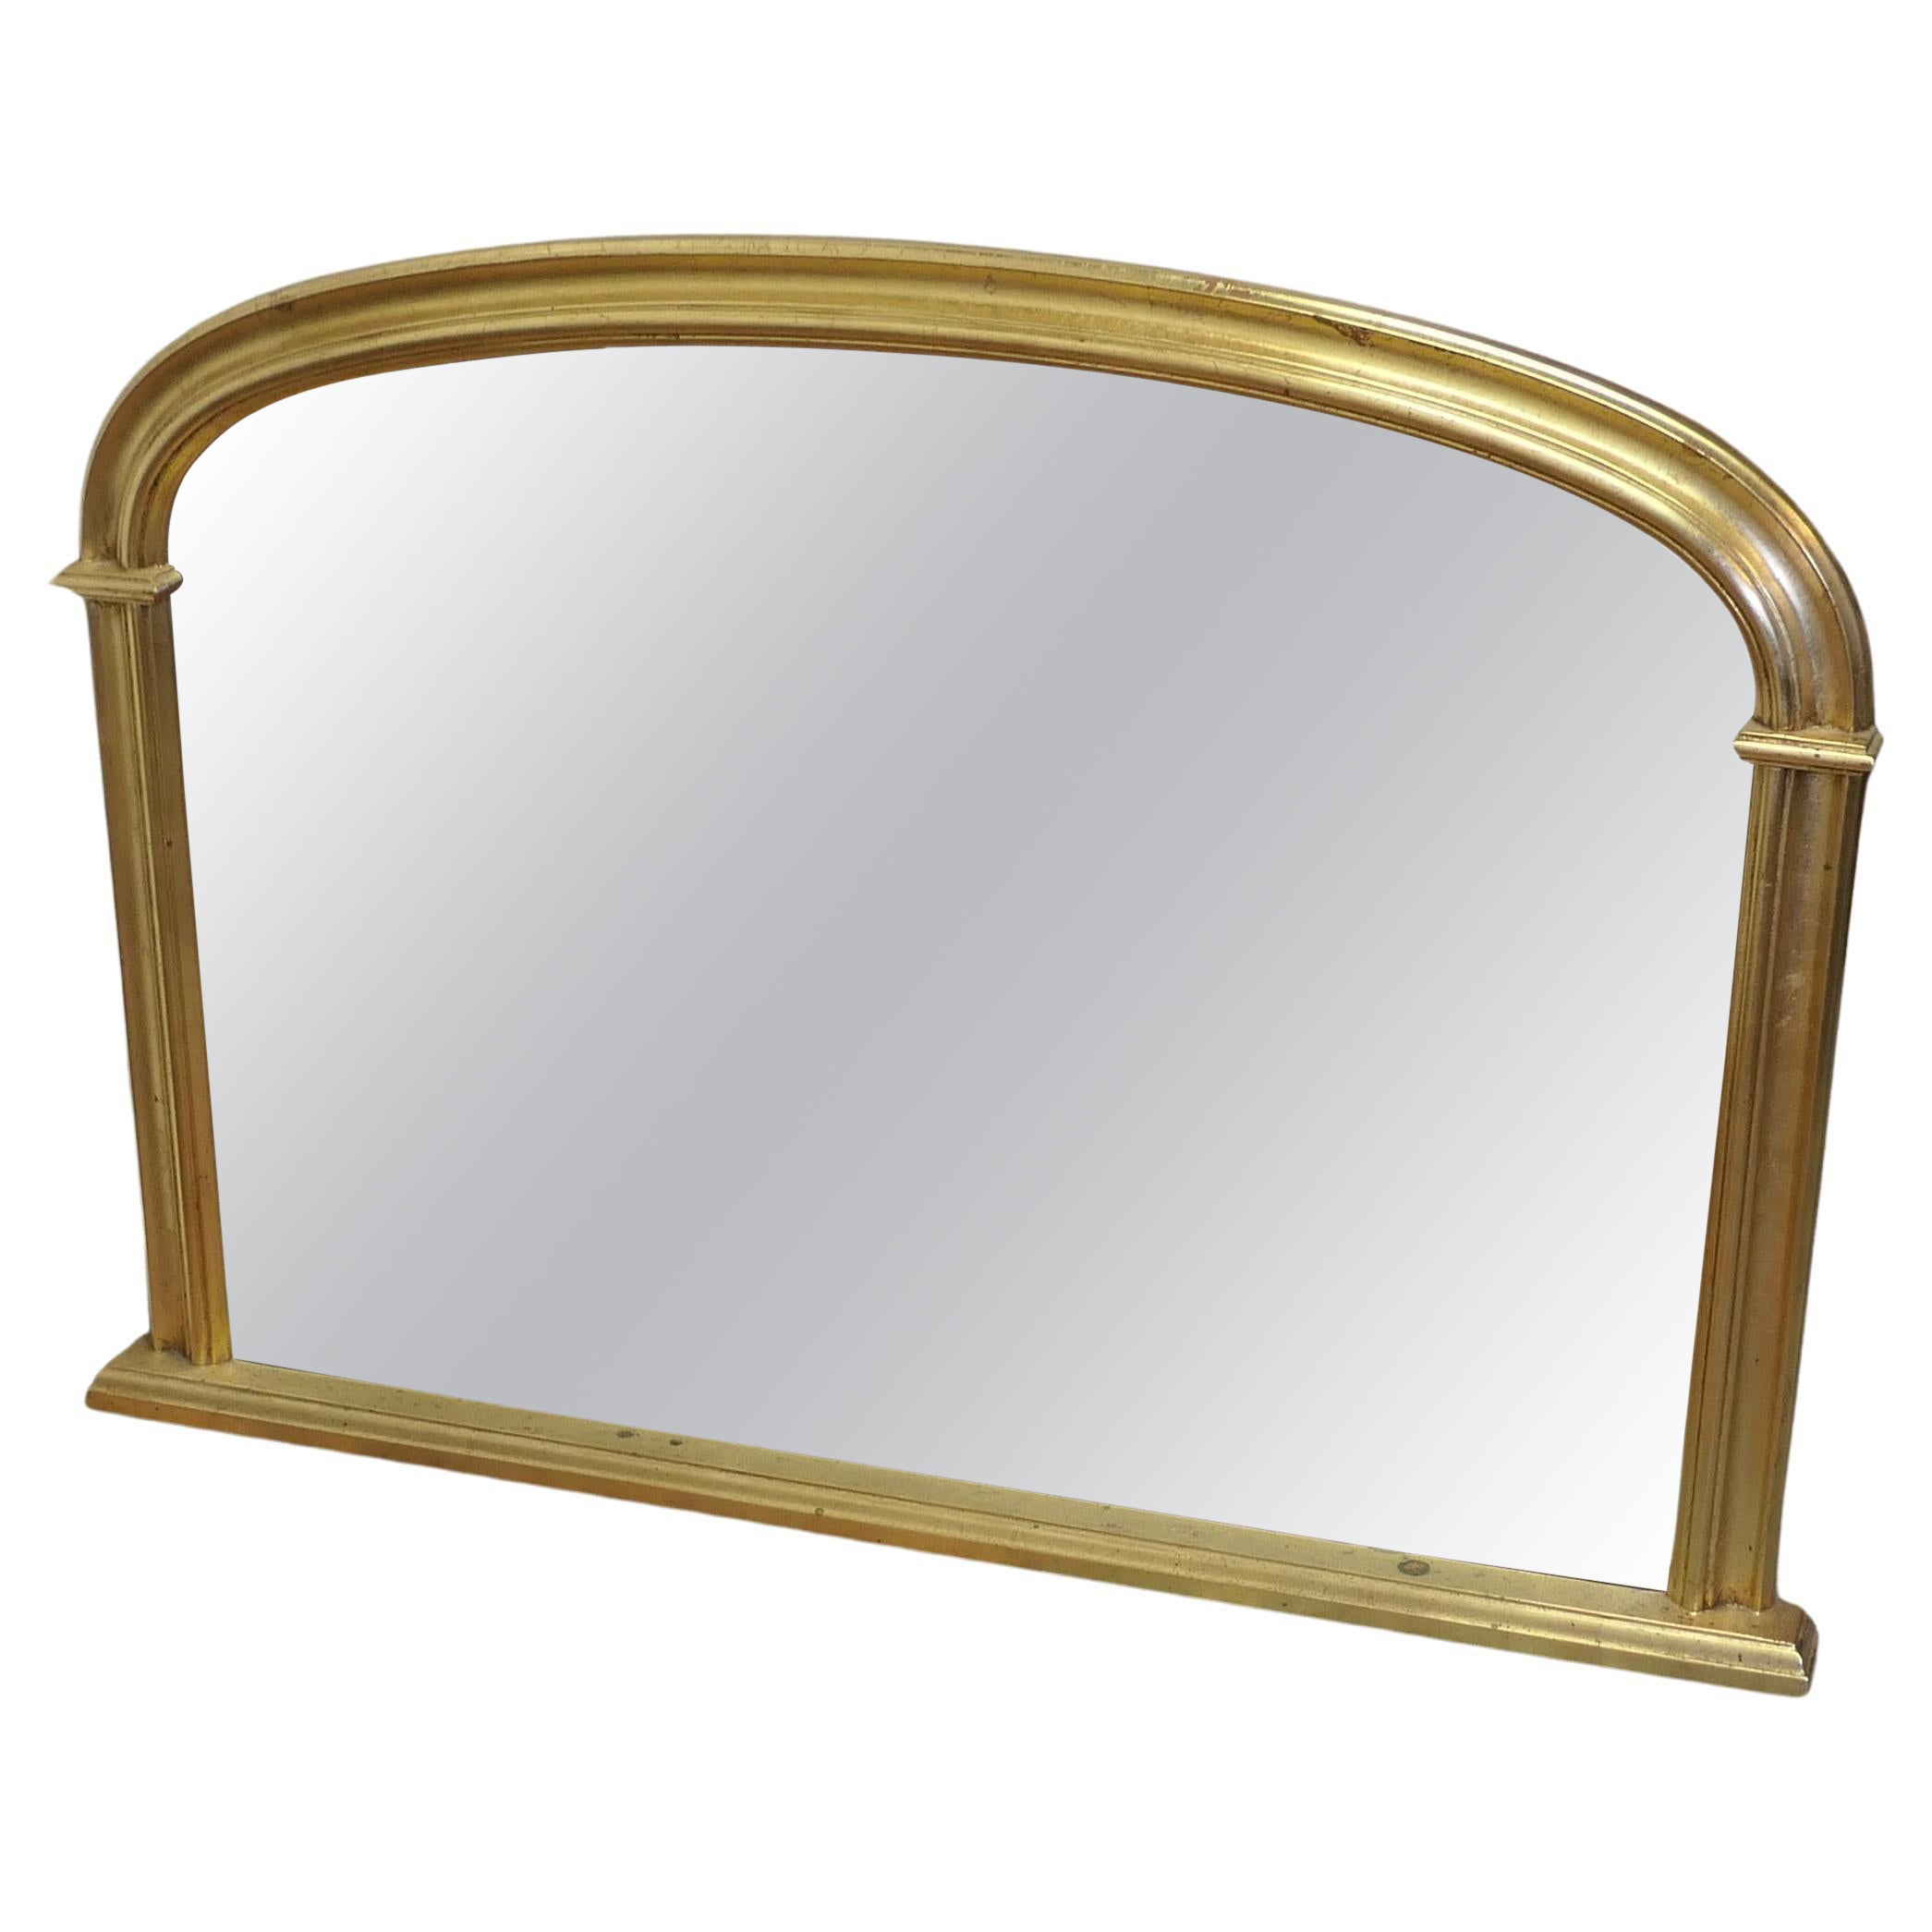 Victorian Style Arched Gold Overmantel Mirror  A Lovely Over Mantle Mirror    For Sale